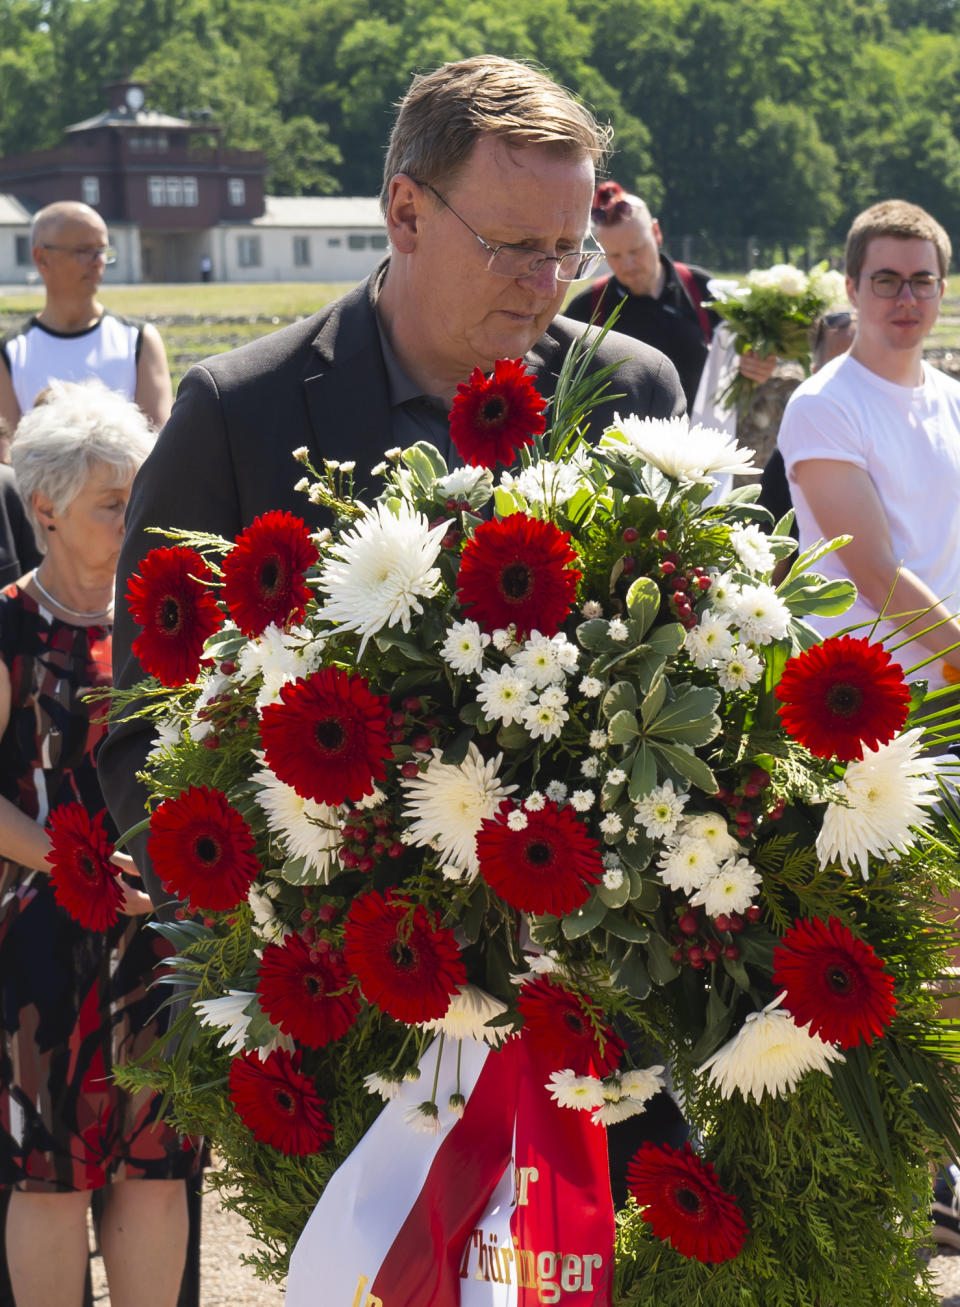 Bodo Ramelow, governor of German state Thuringia, lays a wreath in remembrance for prisoners assigned a pink triangle in the former Nazi concentration camp Buchenwald within the Christopher Street Day in Weimar, Germany, Sunday, June 23, 2019. There were 650 prisoners assigned a pink triangle in the Buchenwald concentration camp between 1937 and 1945. Many of them lost their lives. (AP Photo/Jens Meyer)